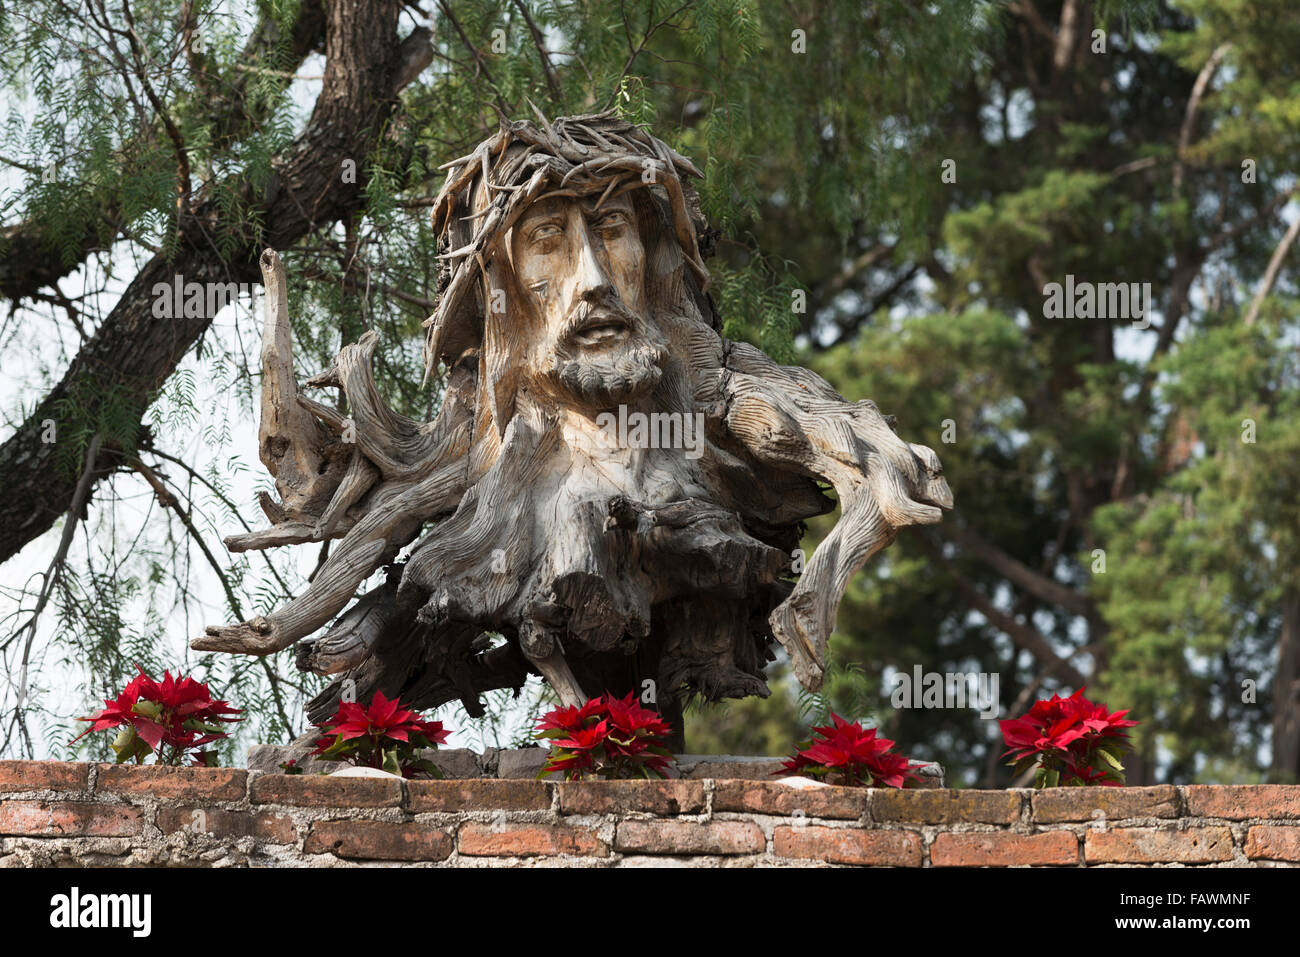 Face of Jesus Christ and crown of thorns carved into a tree stump with red flowers along a wall; Guanajuato, Mexico Stock Photo